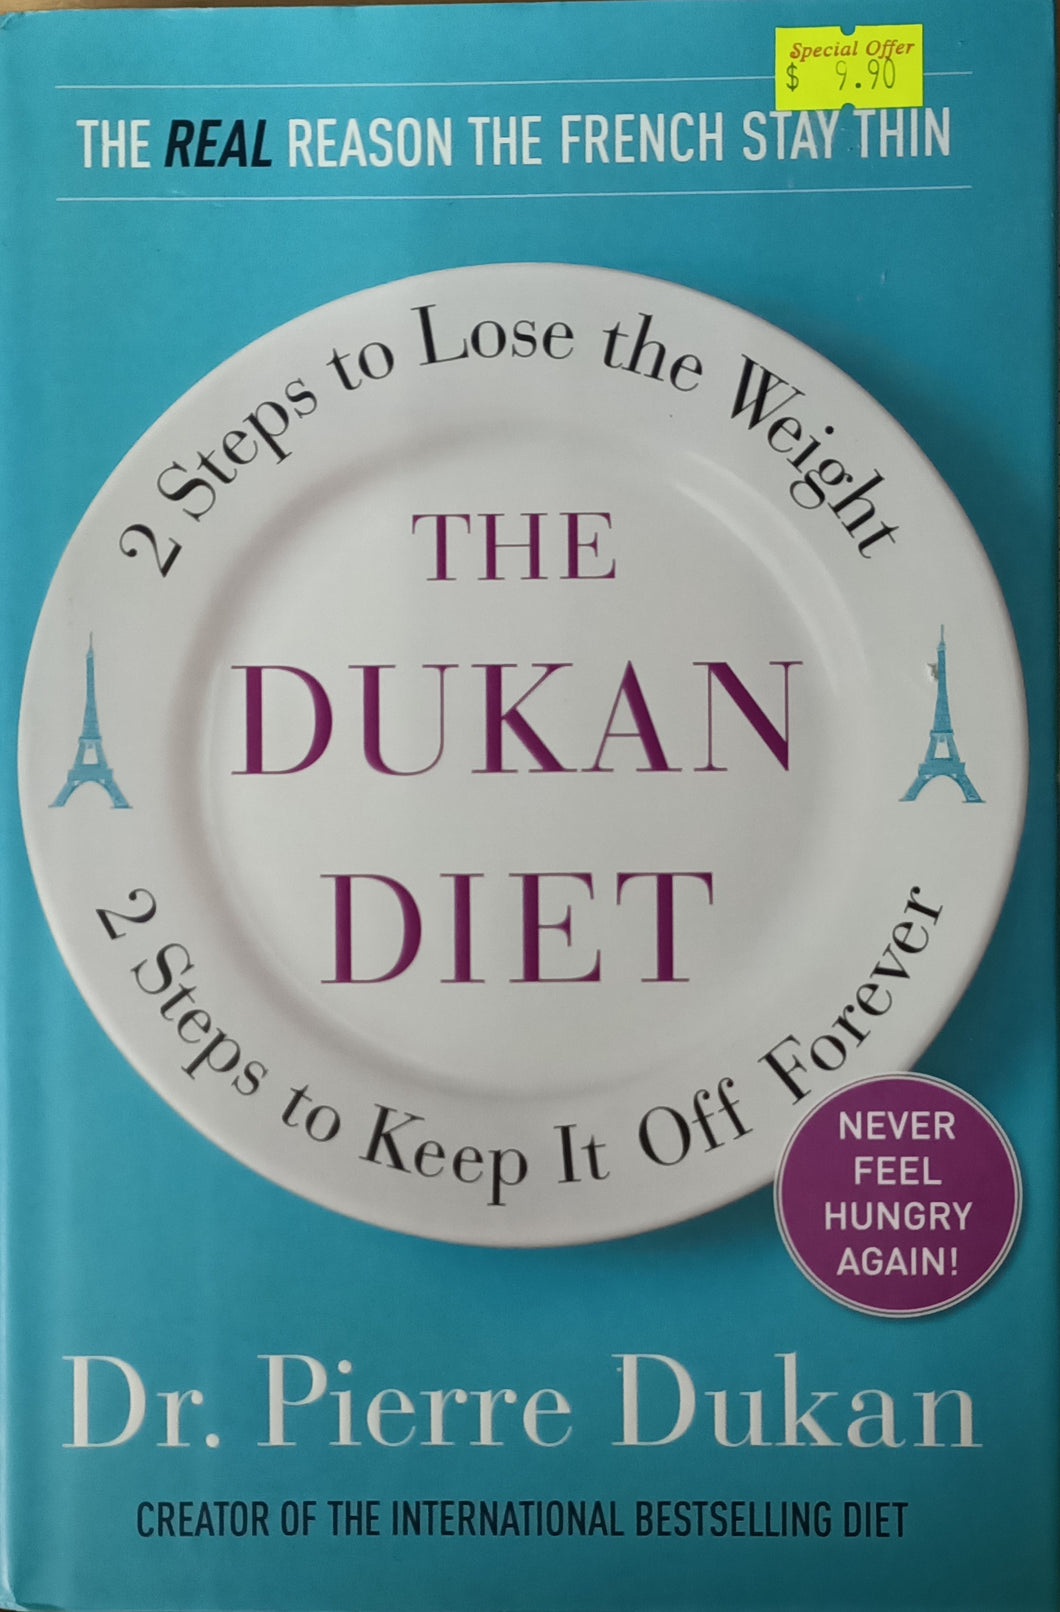 The Dukan Diet : 2 Steps to Lose the Weight, 2 Steps to Keep It Off Forever - Dr Pierre Dukan